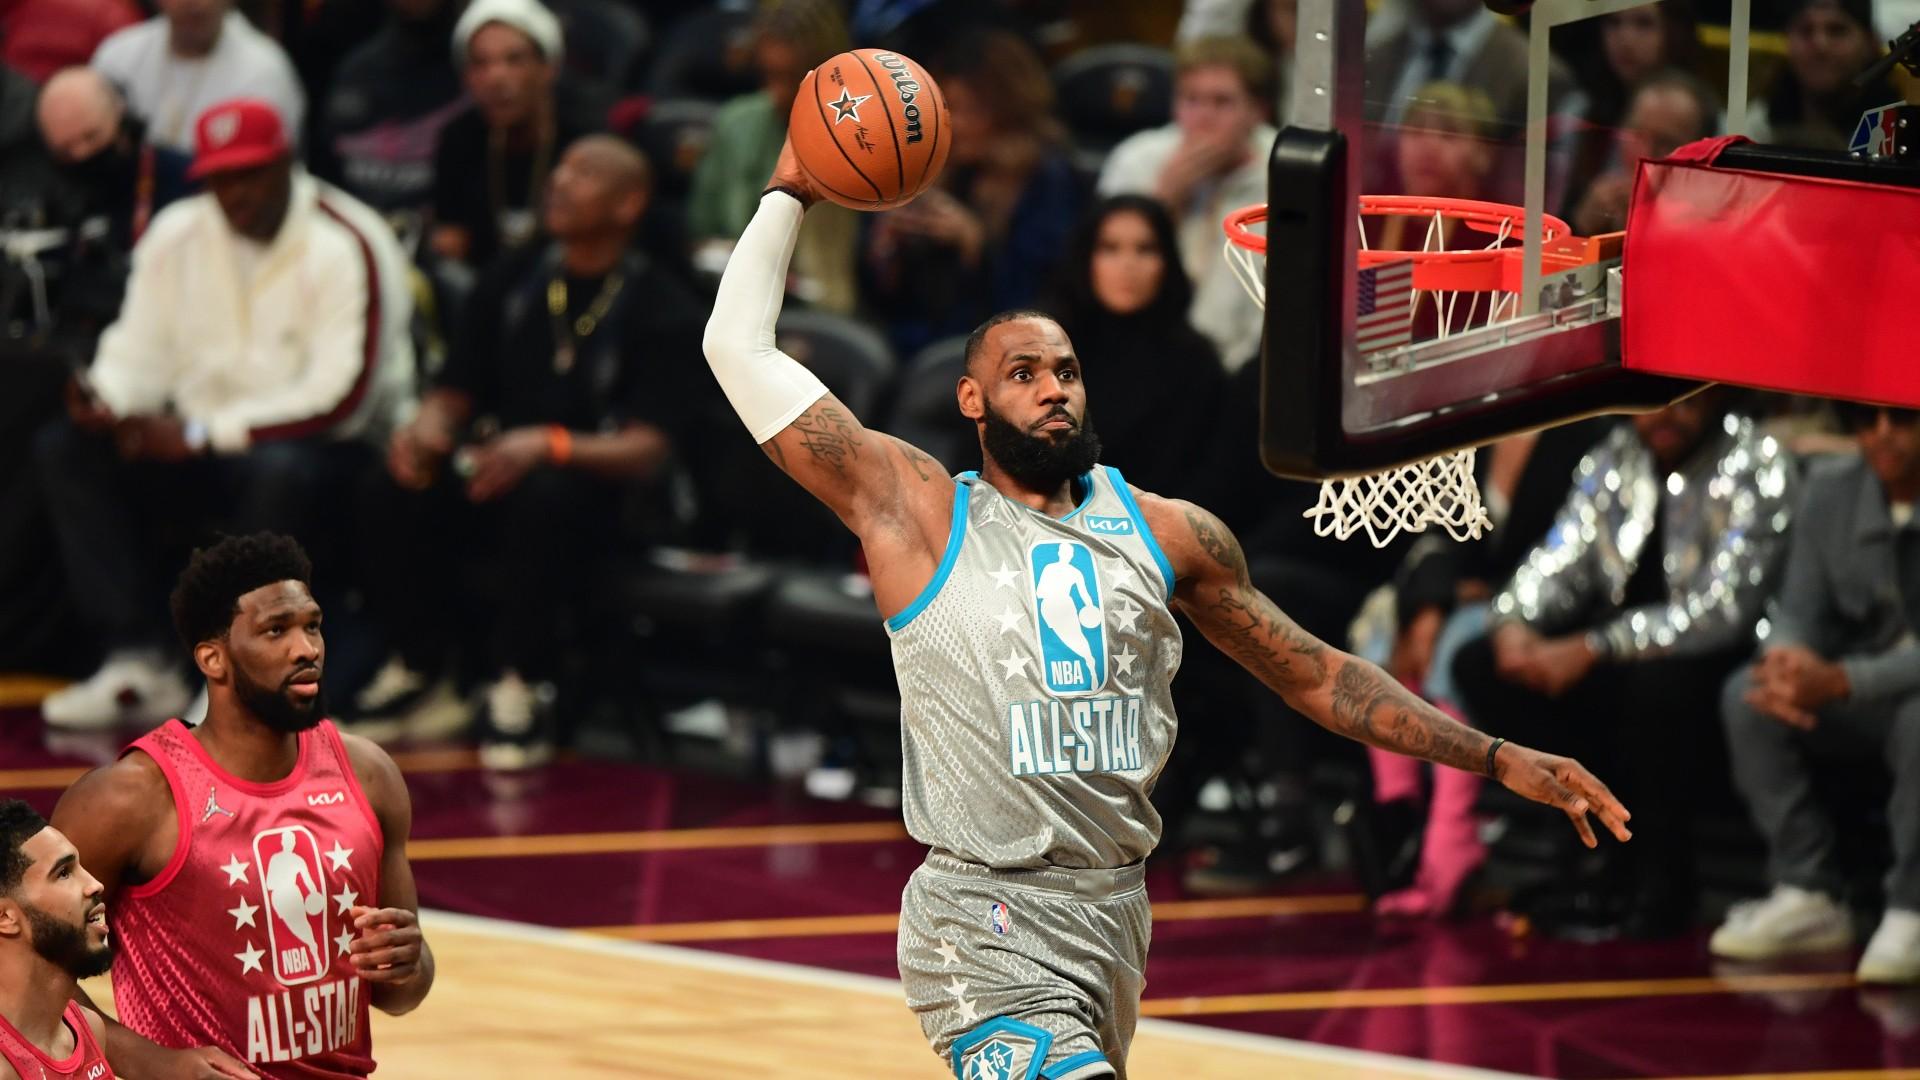 LeBron James at 2023 All-Star Game: Examining Lakers star’s case and place in All-Star history